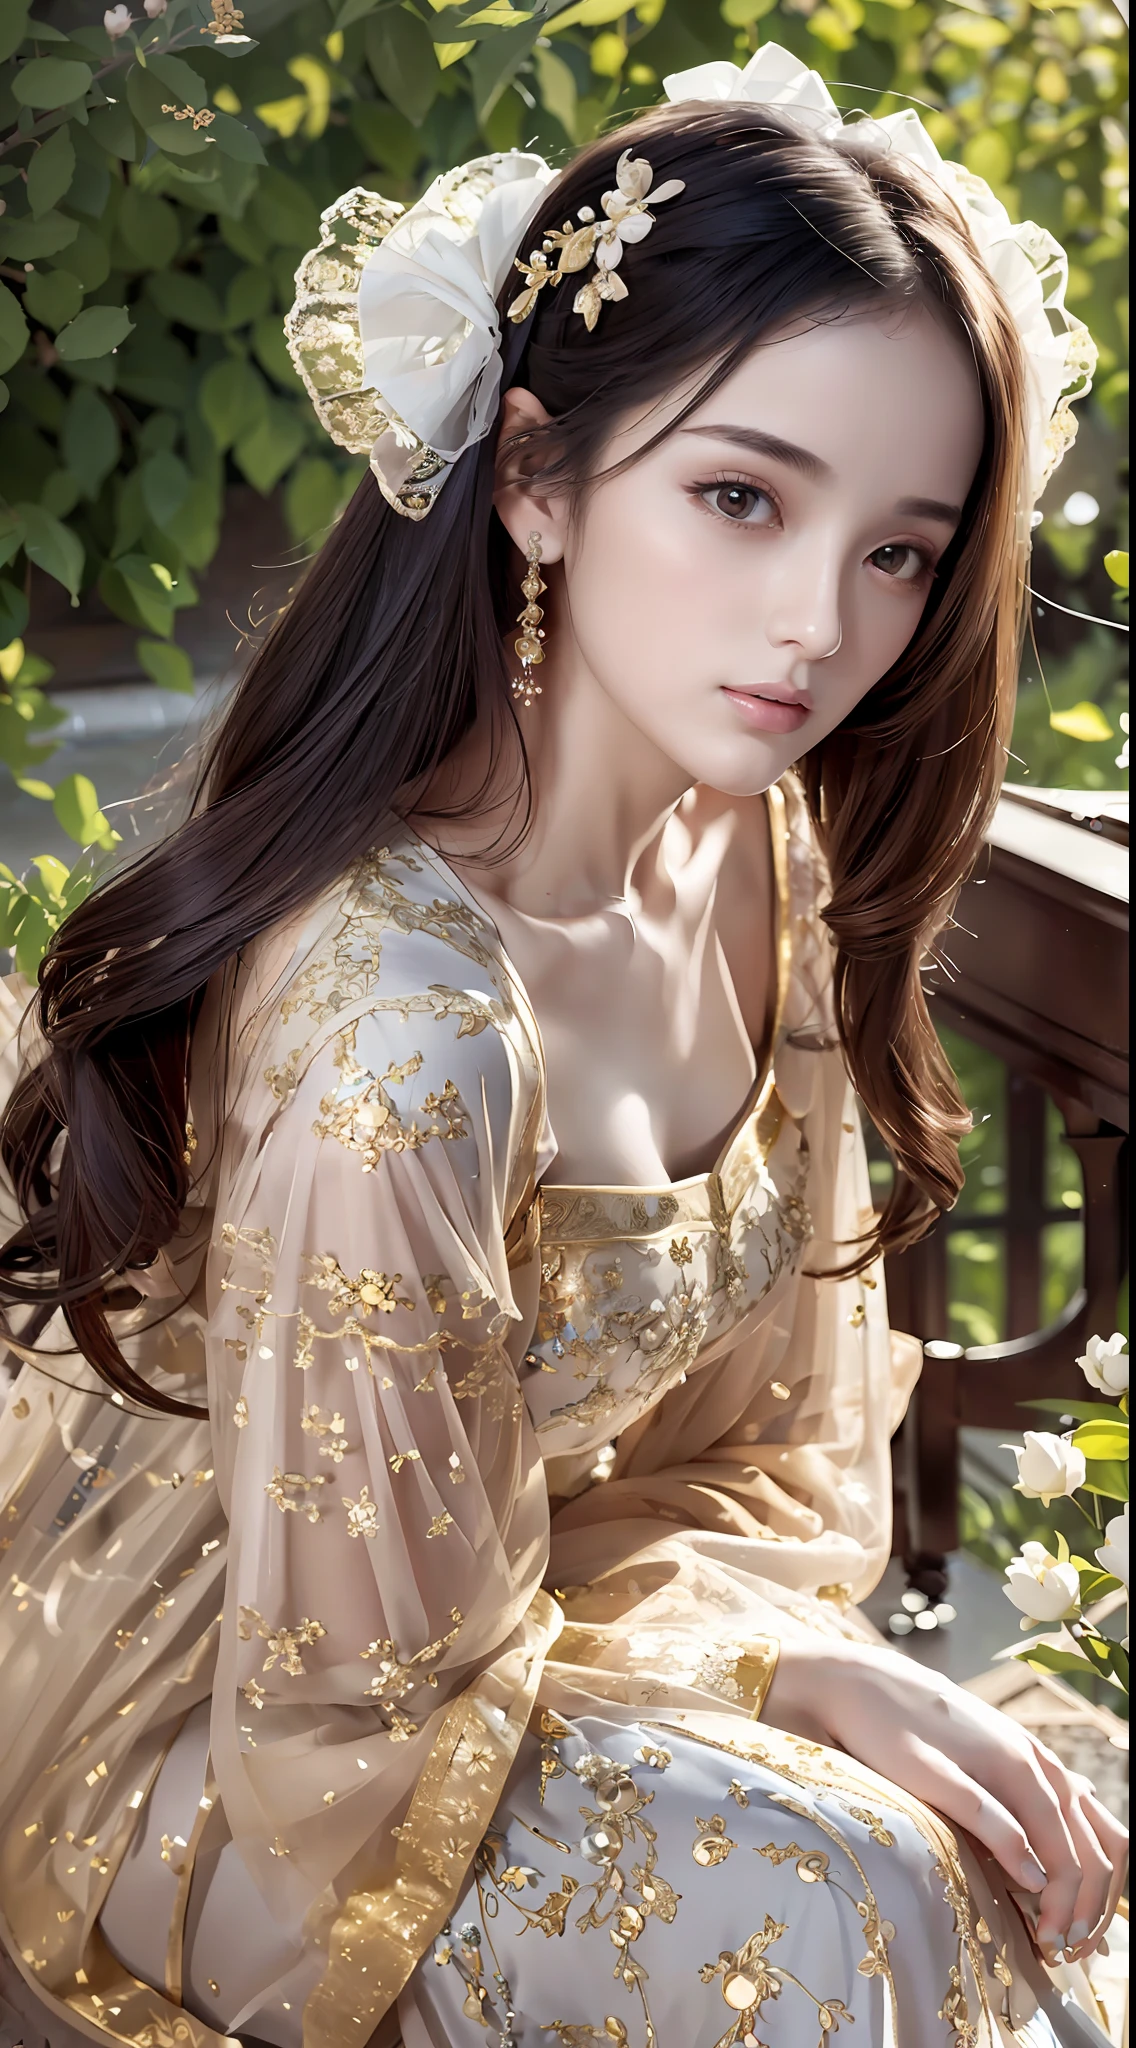 A beautiful girl, literary, beautiful and elegant, with slender eyebrows and clear eyes. Ruddy lips, soft skin, bandeau dress with gold edges, antique long-sleeved dress, stroking posture and waiting posture. The blue sky and the quiet courtyard (literary and elegant, antique, long-sleeved dresses, piano posture), full body close-up